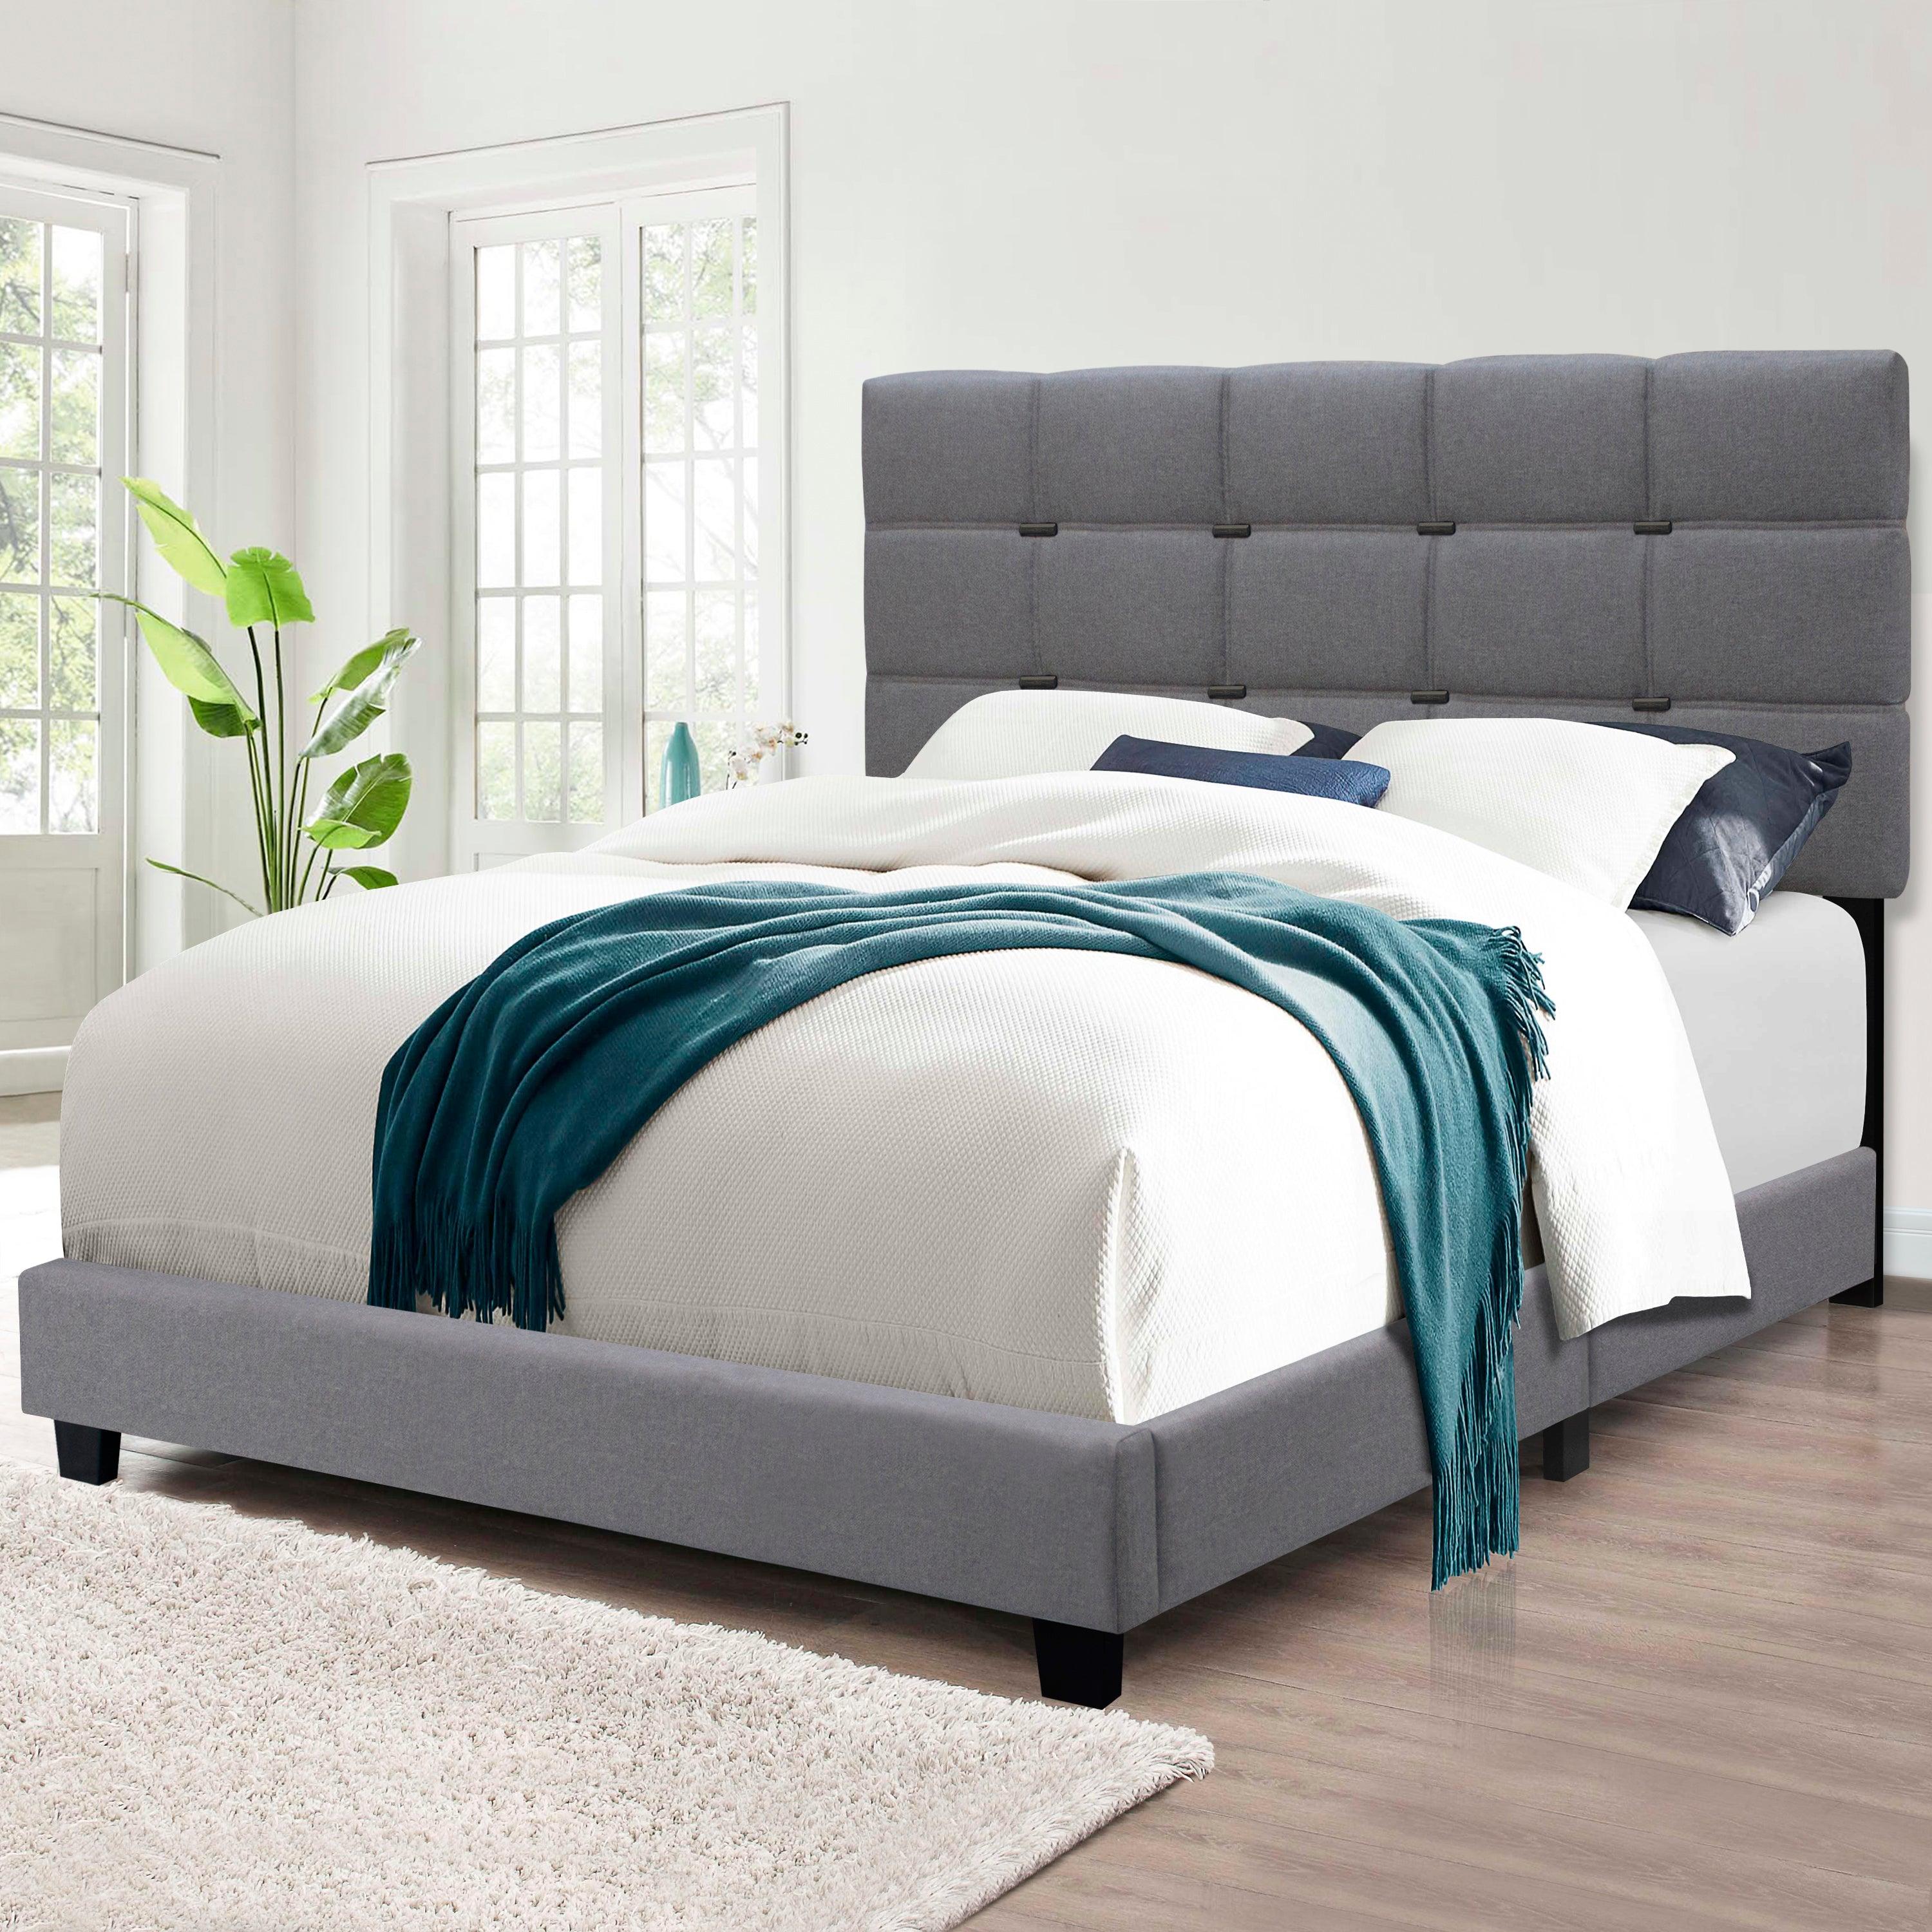 🆓🚛 Queen Size Adjustable Upholstered Bed Frame Stylish Collection Durable and Dirt-Resistant, Gray